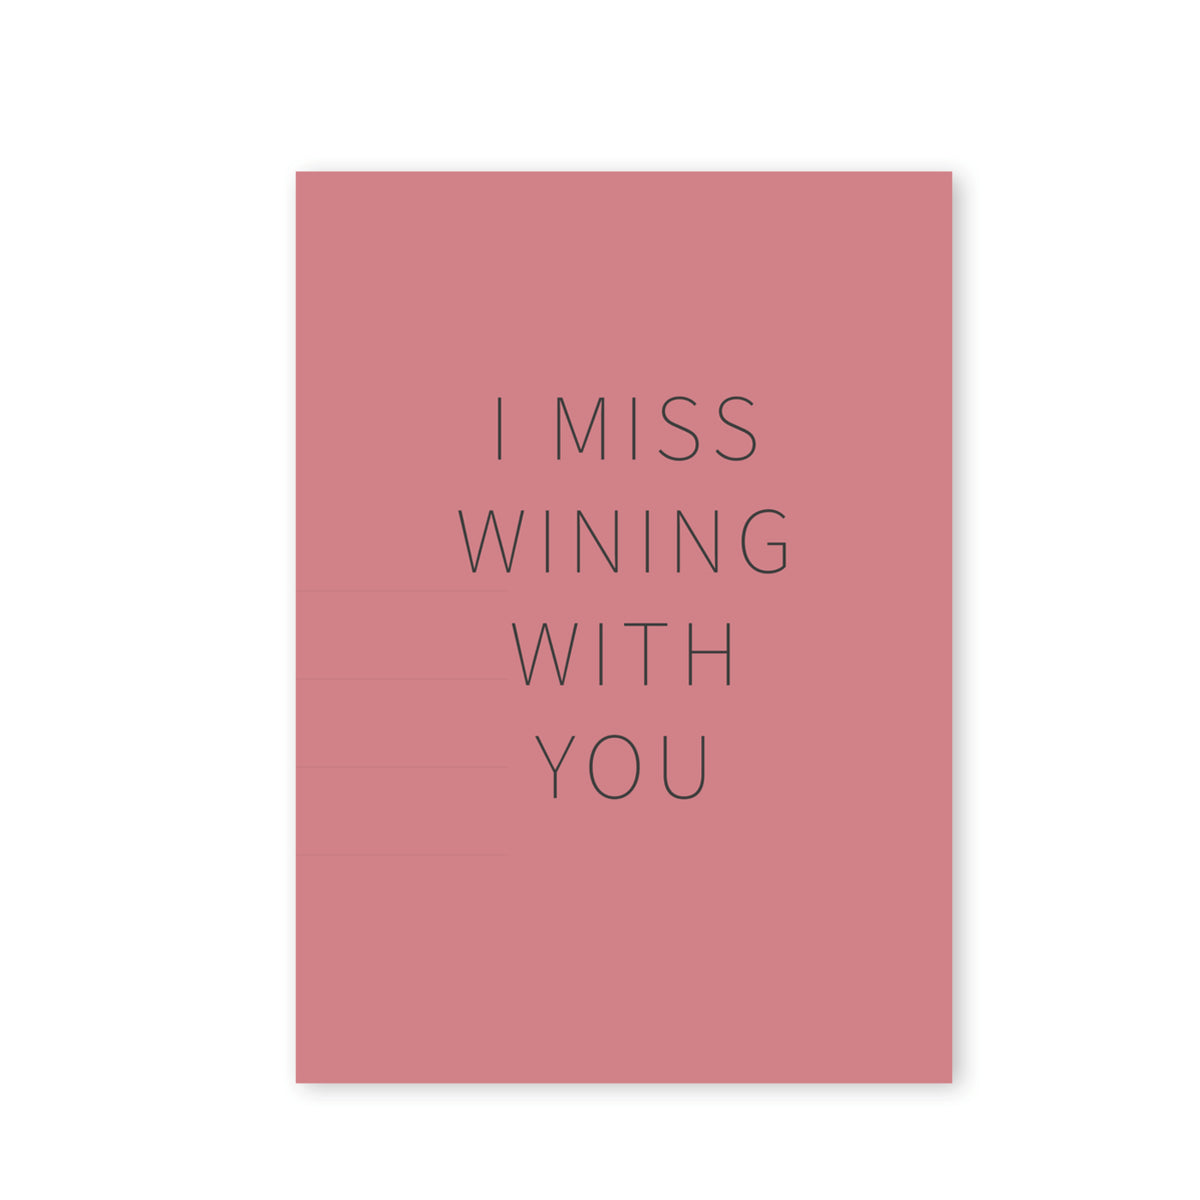 I miss wining with you